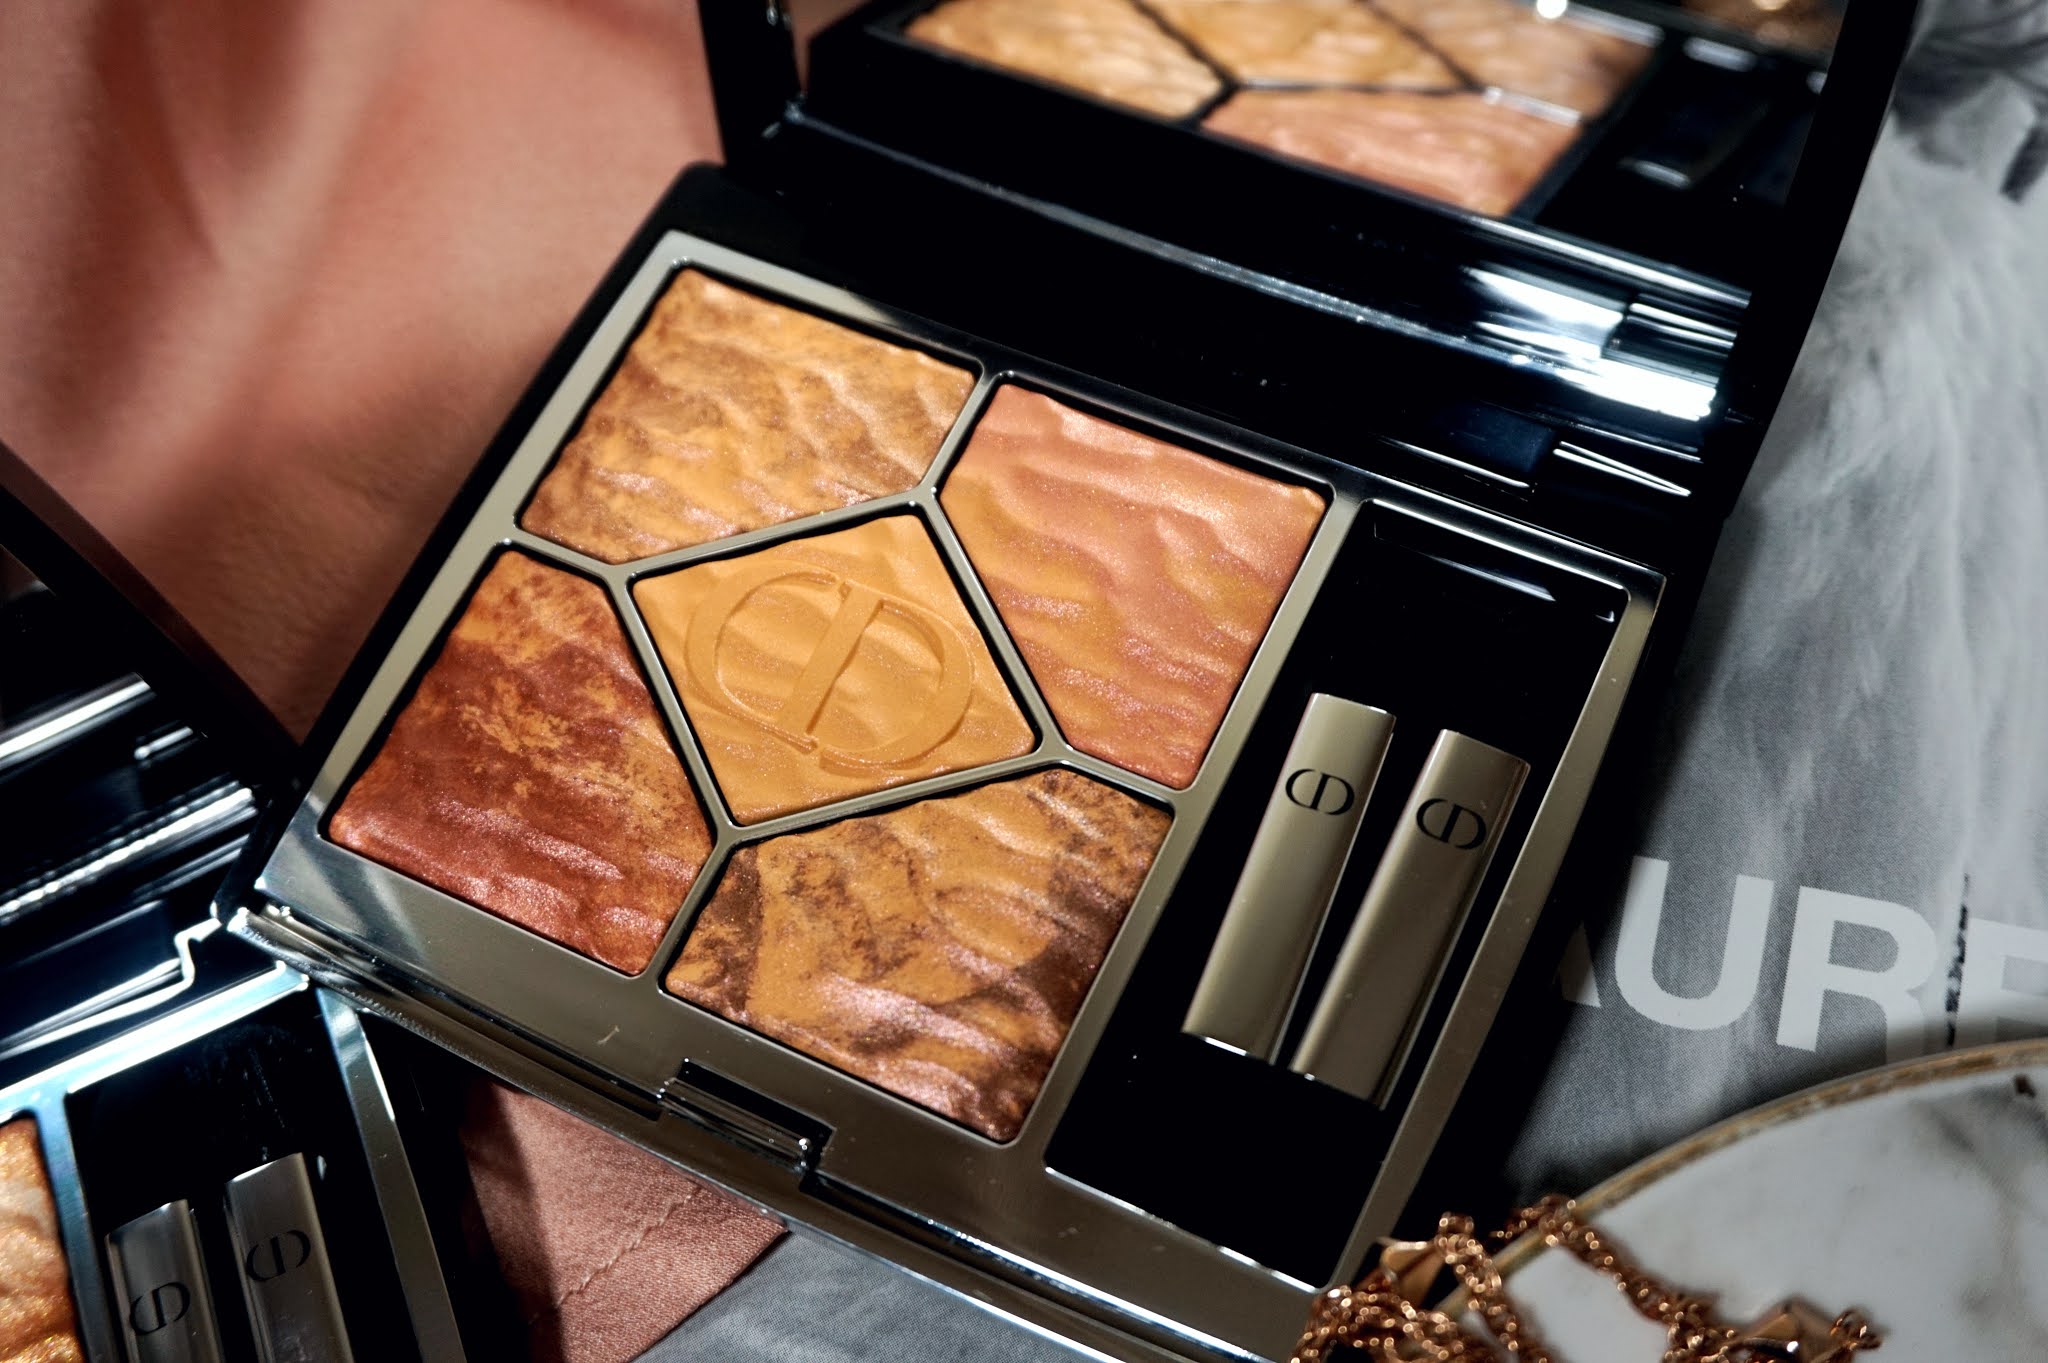 Dior Summer 2021 Dune & Mirage 5 Couleurs Eyeshadow Palette Review and Swatches